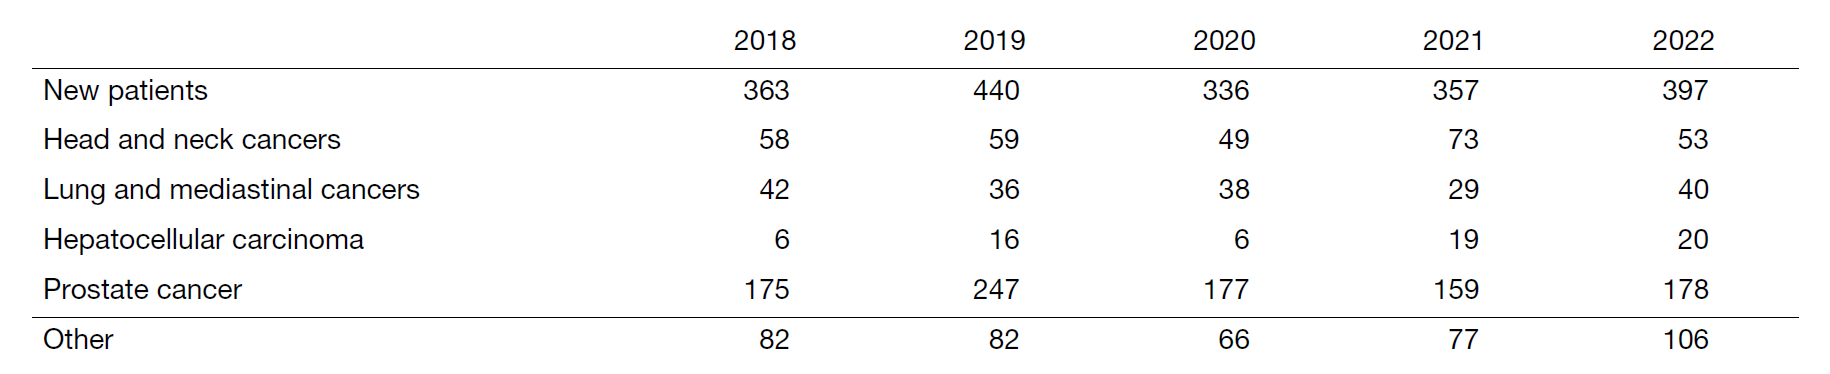 Table 1. Number of patients treated with PBT during 2018-2022